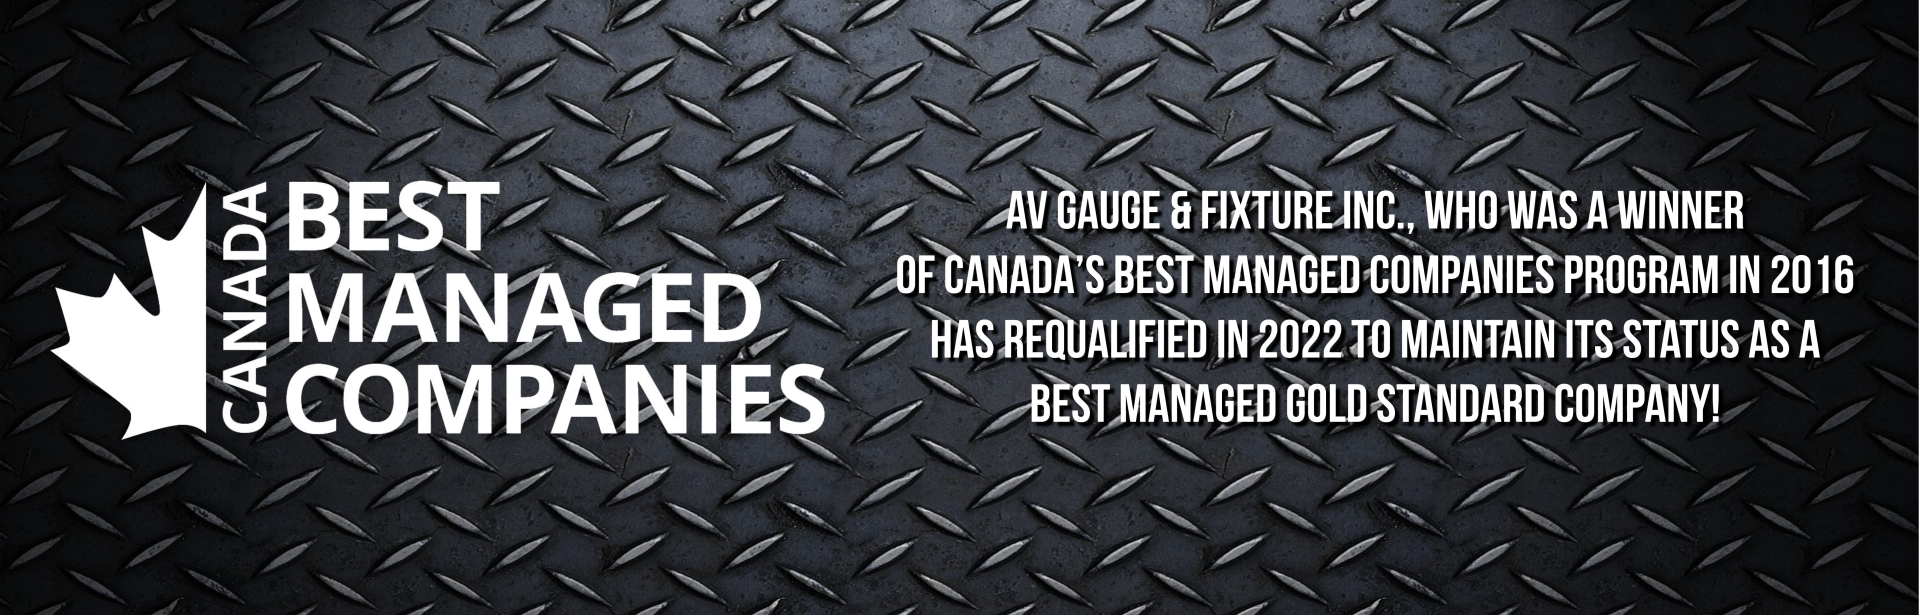 A V Gauge & Fixture Inc. is a 2021 winner of Canada’s Best Managed Companies.